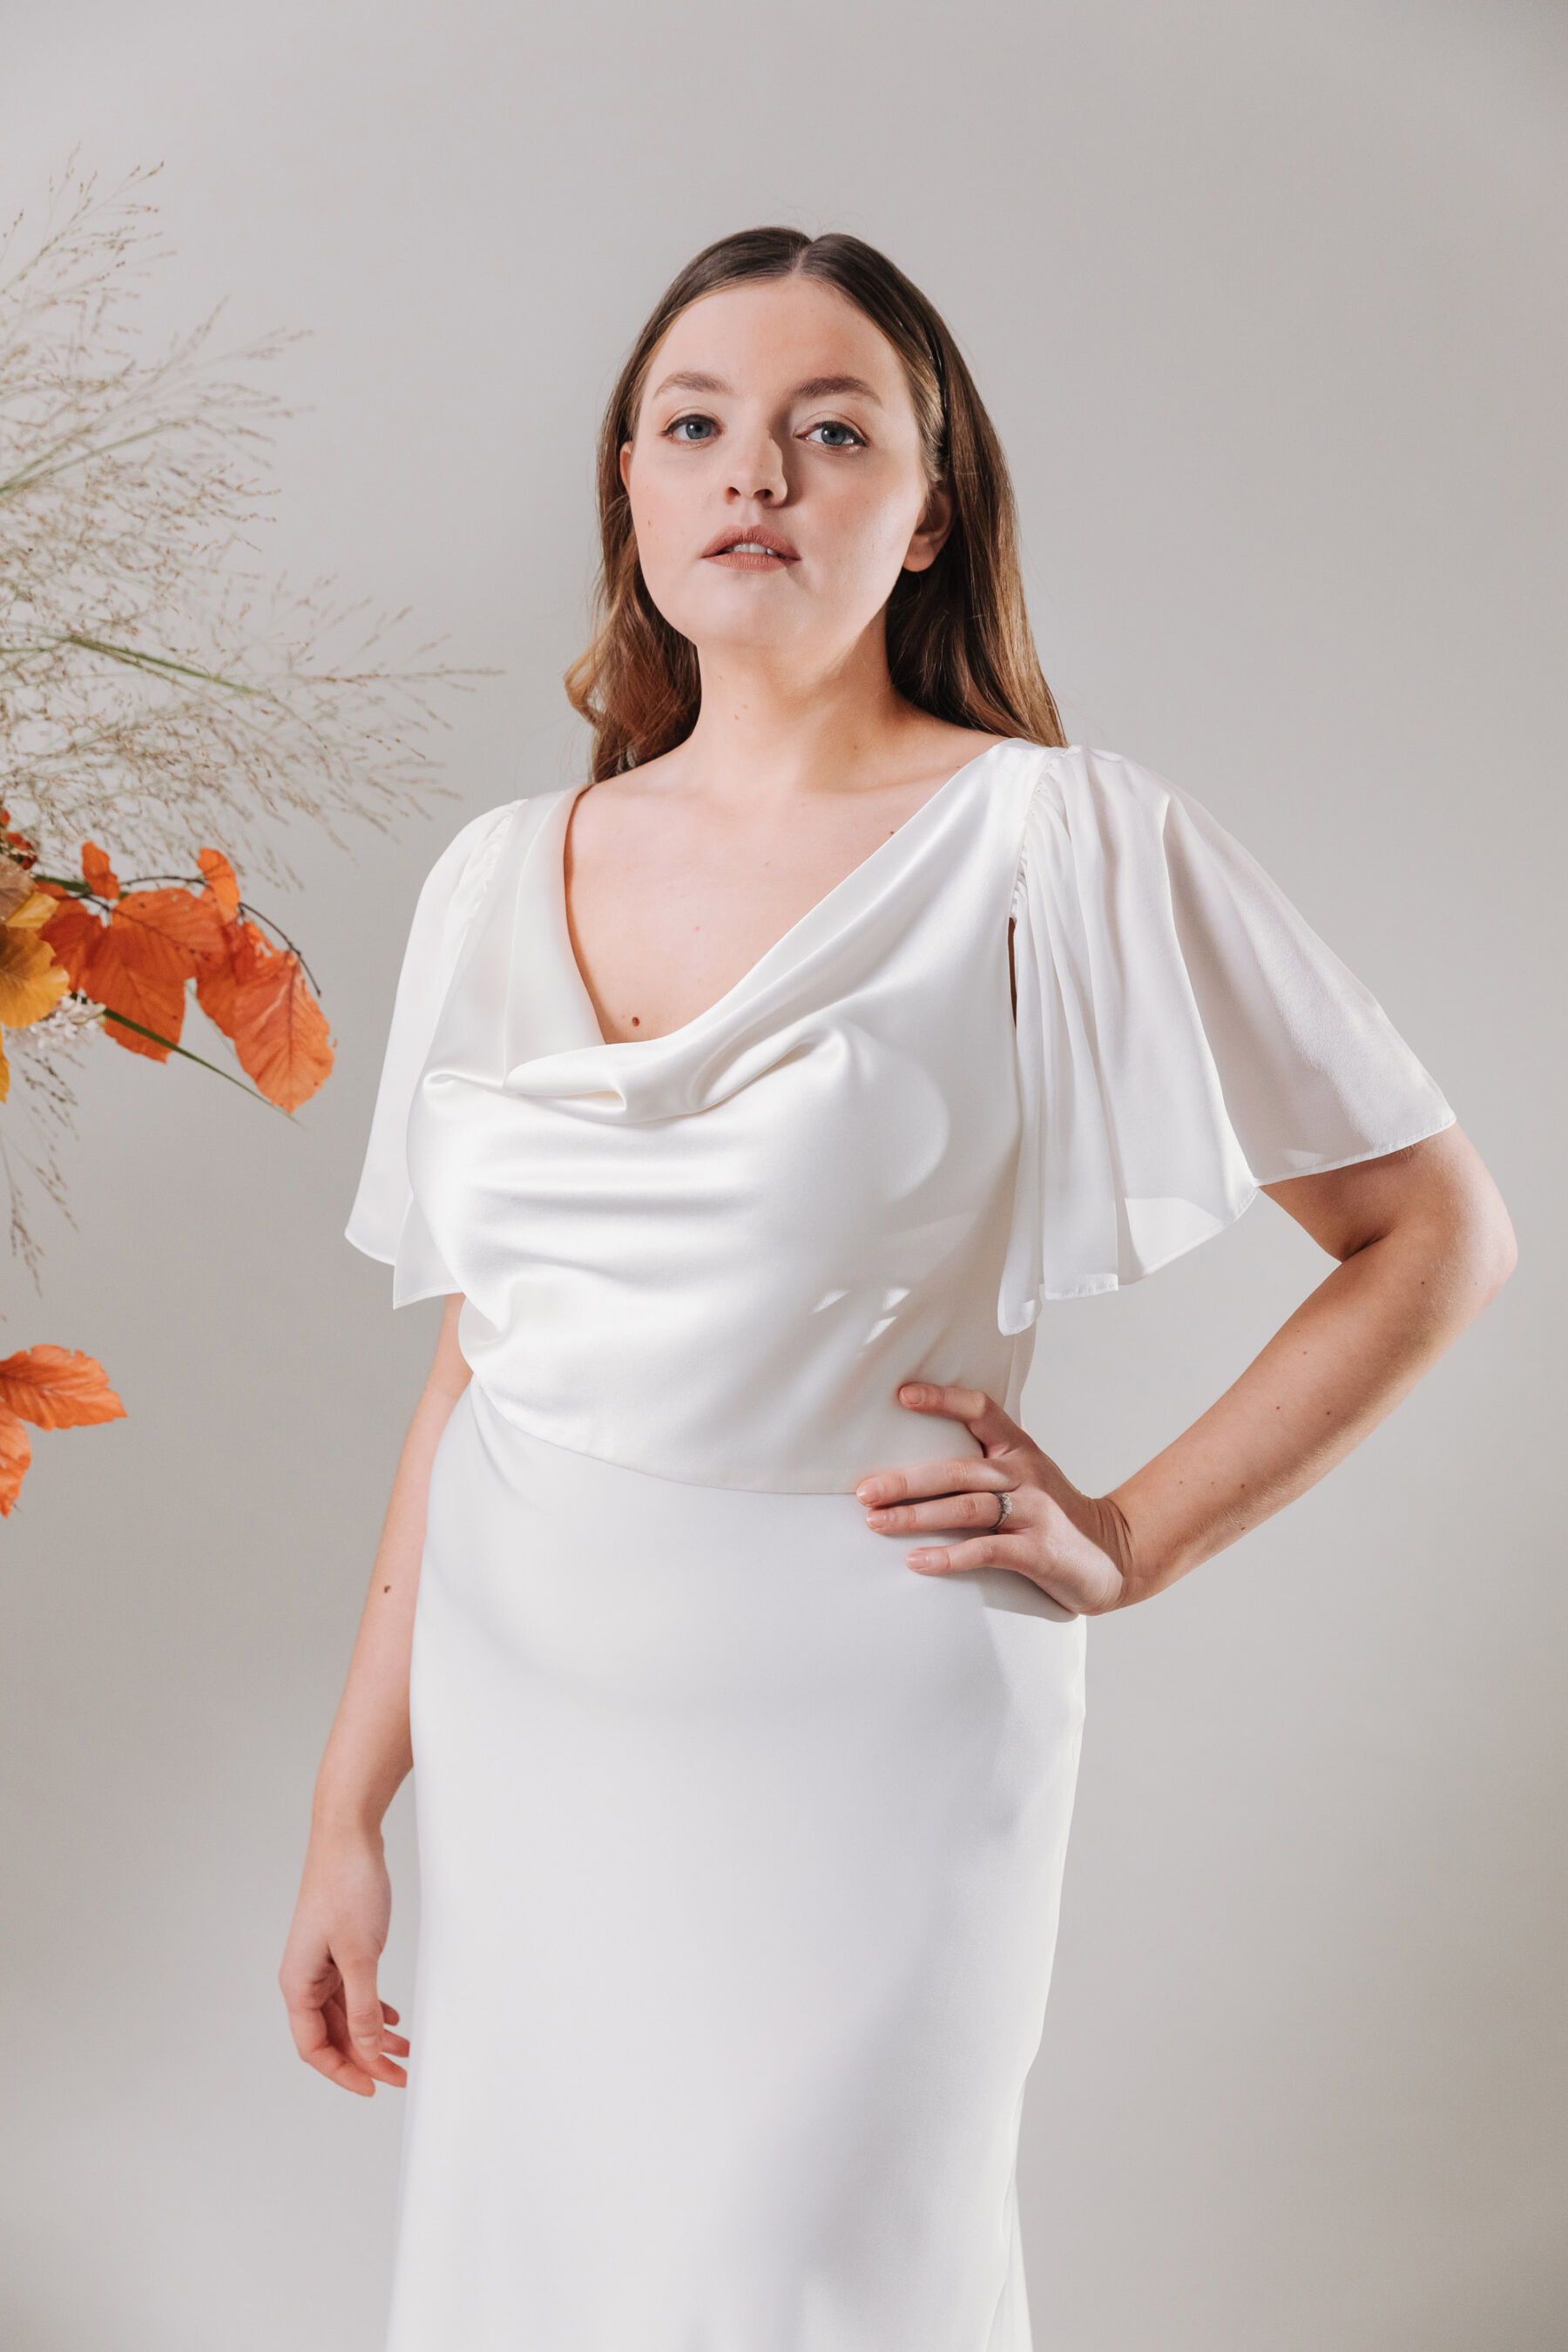 Cowel neck wedding dress for a curvy bride by Kate Beaumont.